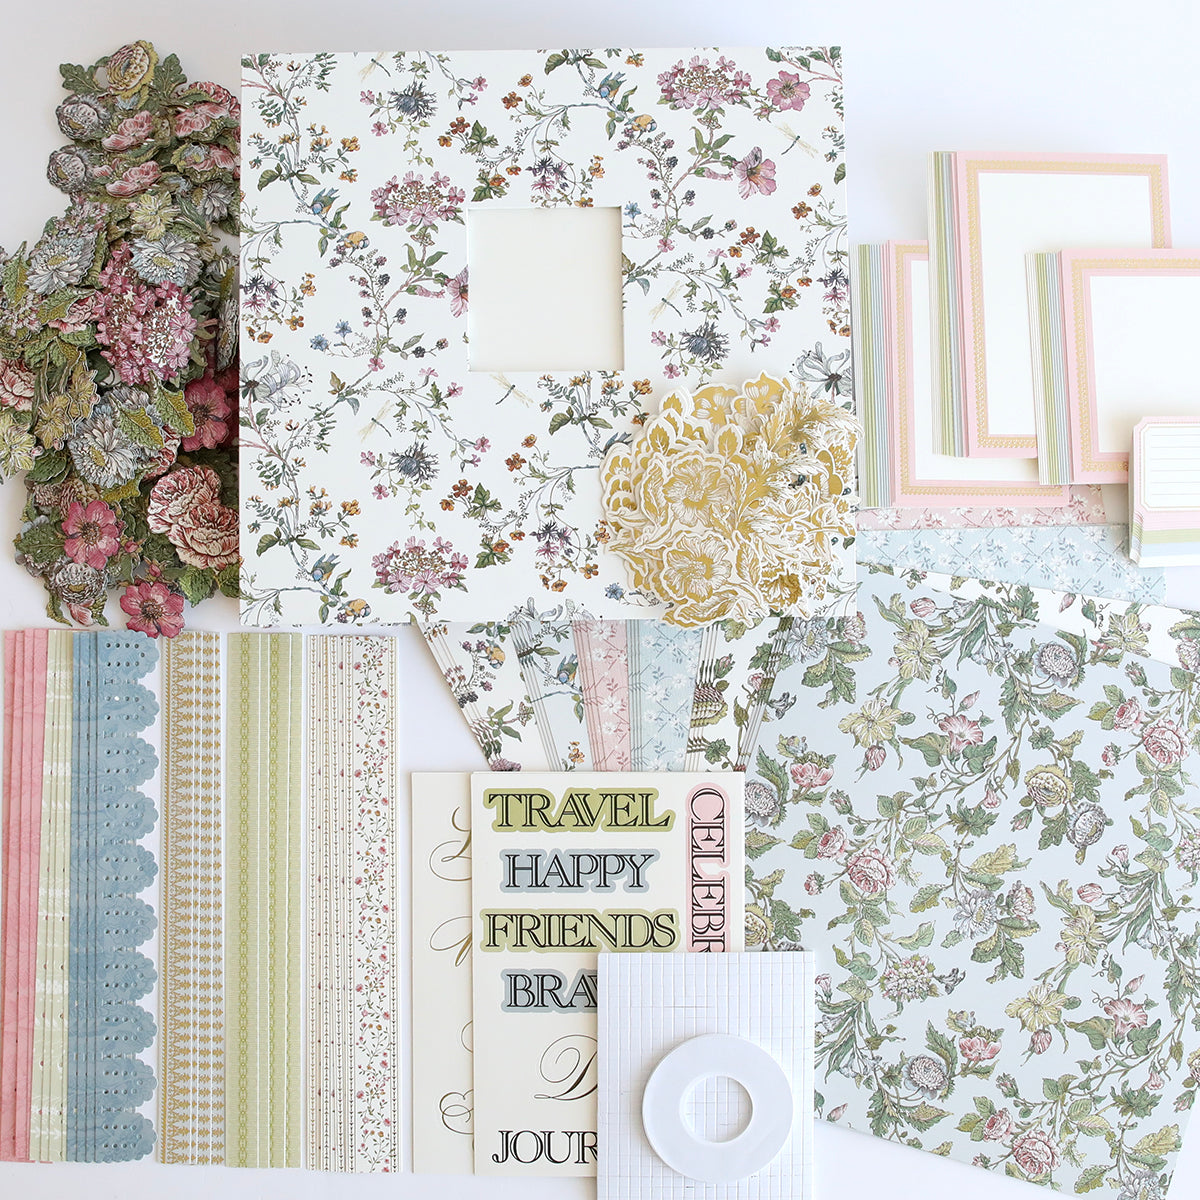 A collection of scrapbooking essentials including patterned papers from the Simply Wildflower Meadow Scrapbook Kit, floral embellishments, and decorative frames on a white background.